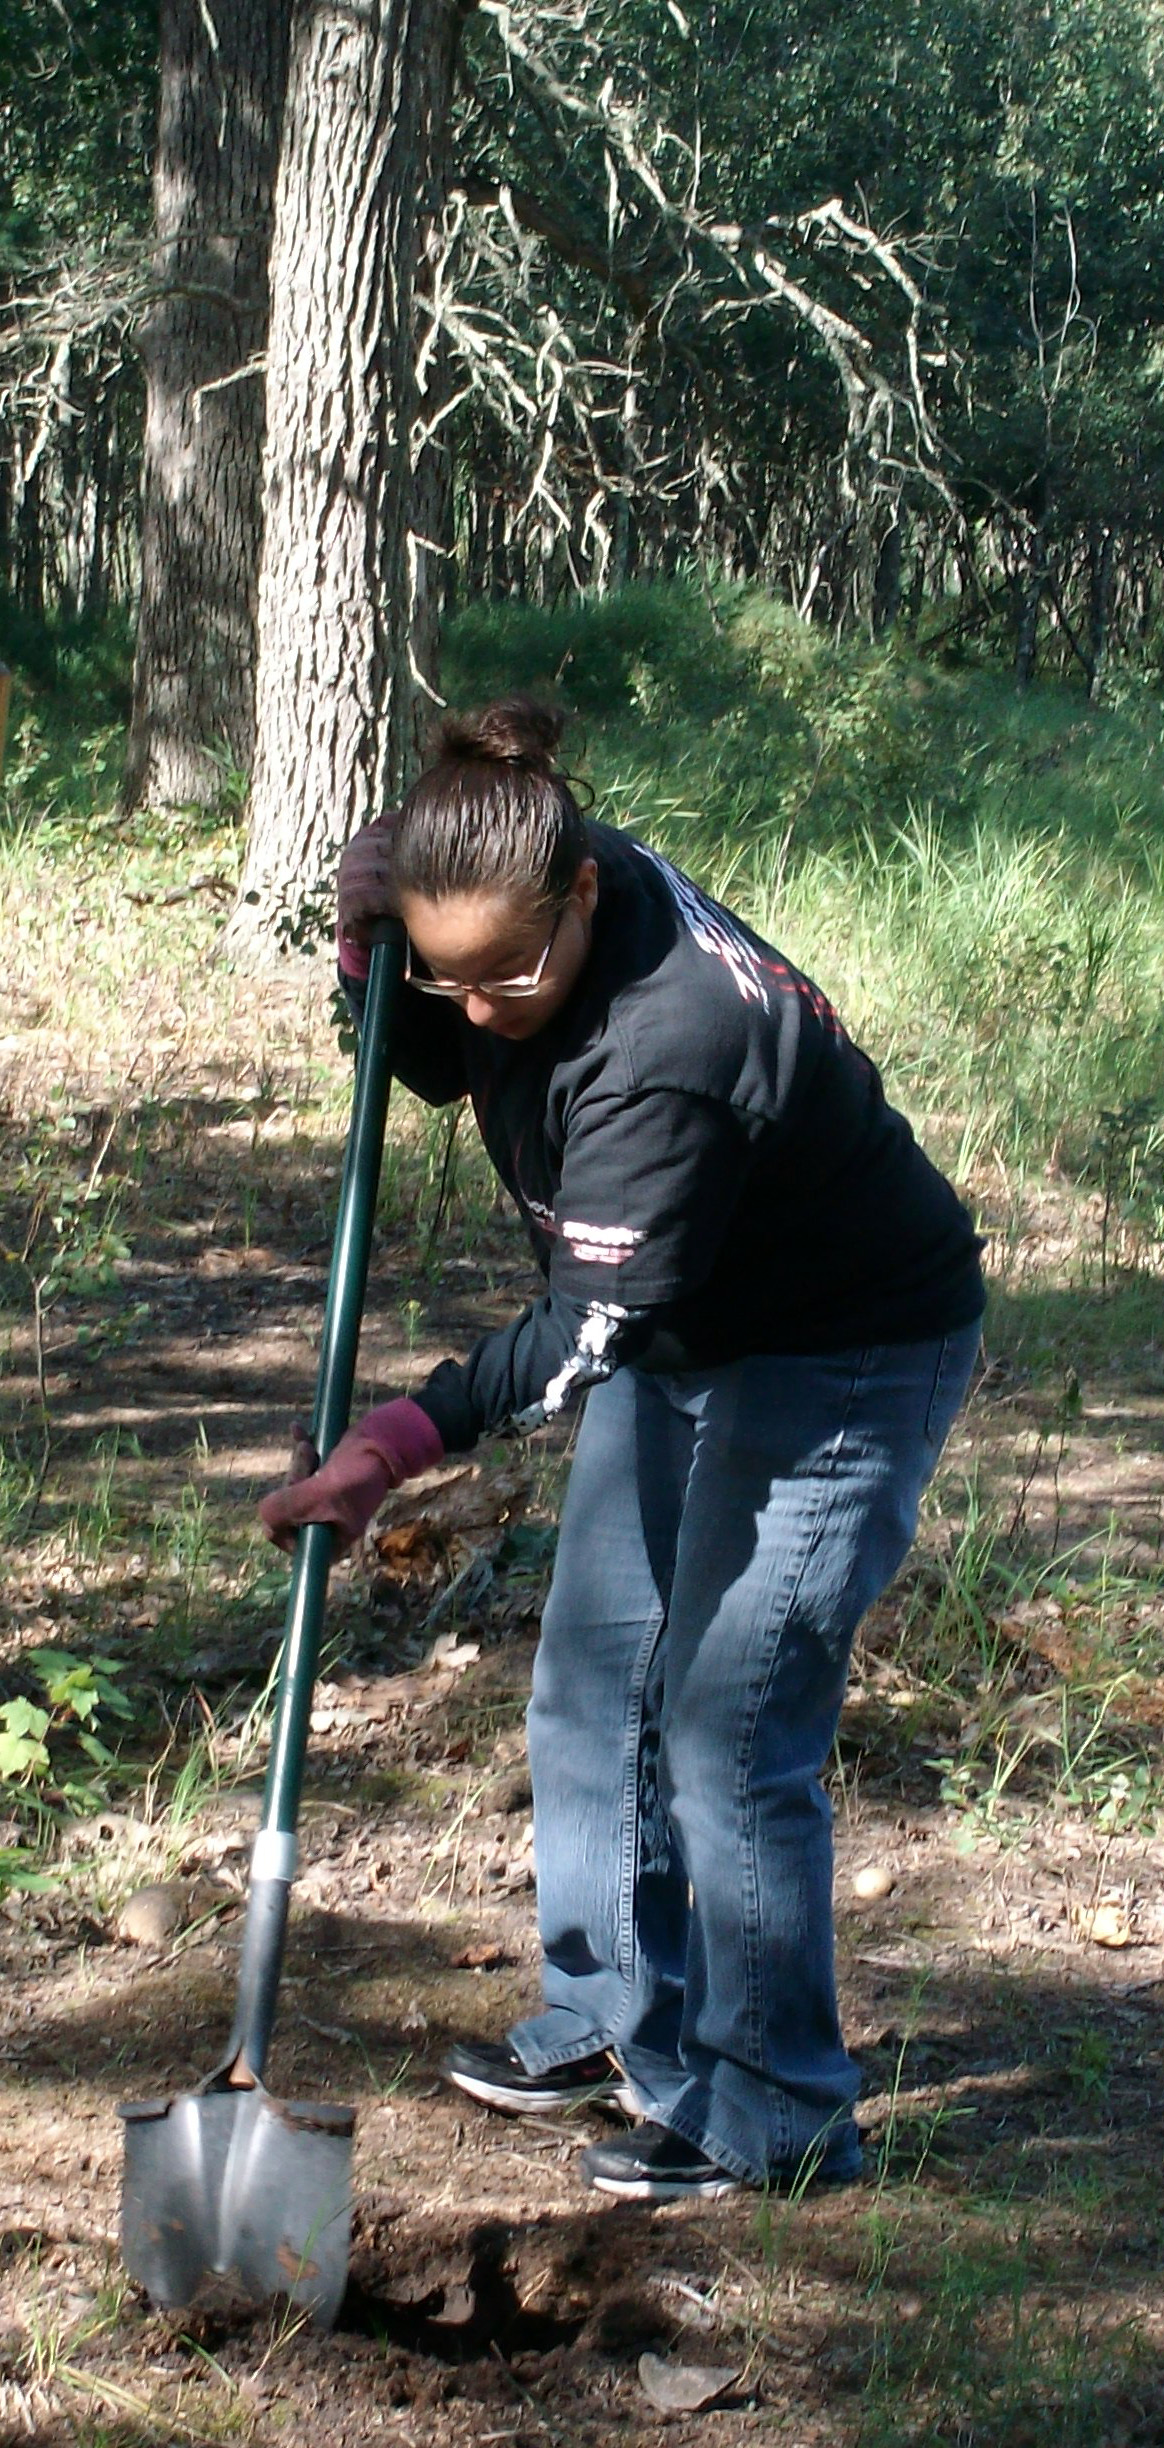 Teenage Girl Planting Tree in Forest